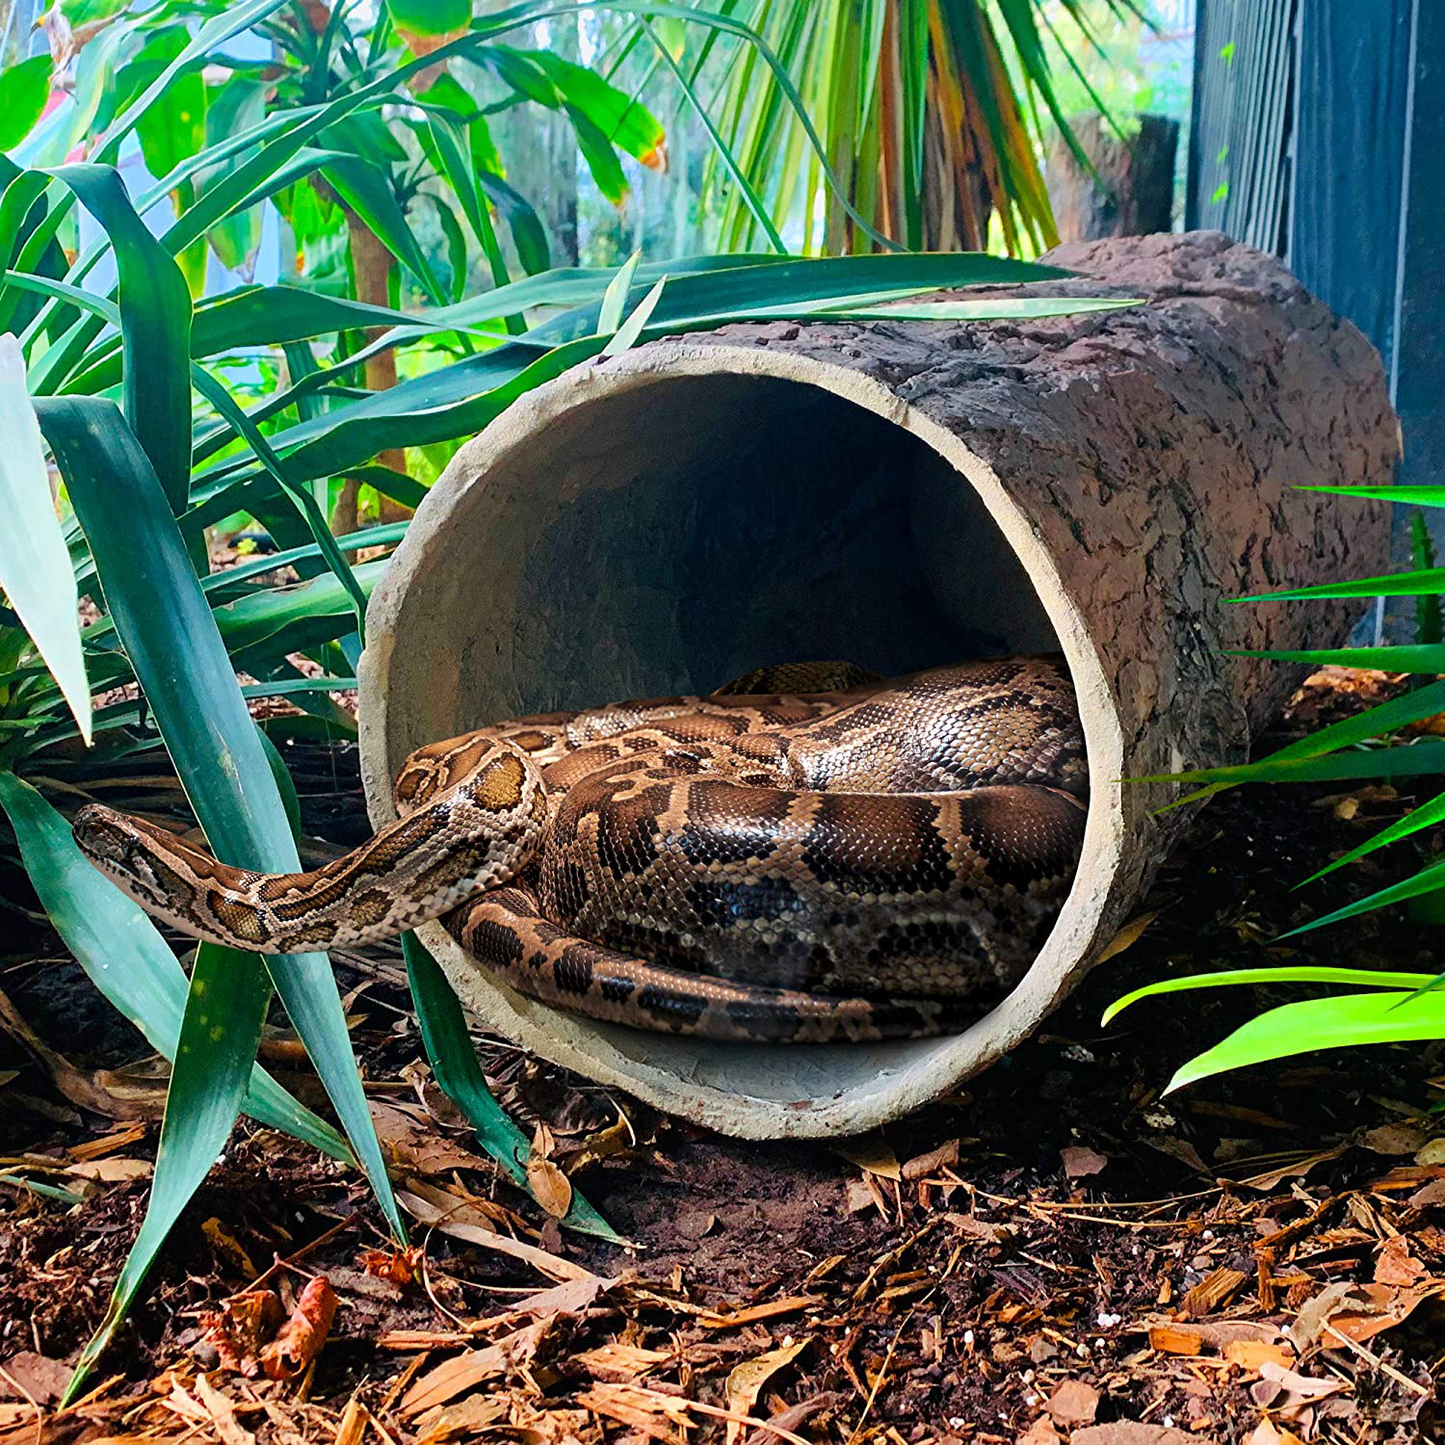 Hollow Hideaway 🌳 Large Tree Stump Reptile Hideout for Snakes, Lizards, Turtles and Critters.